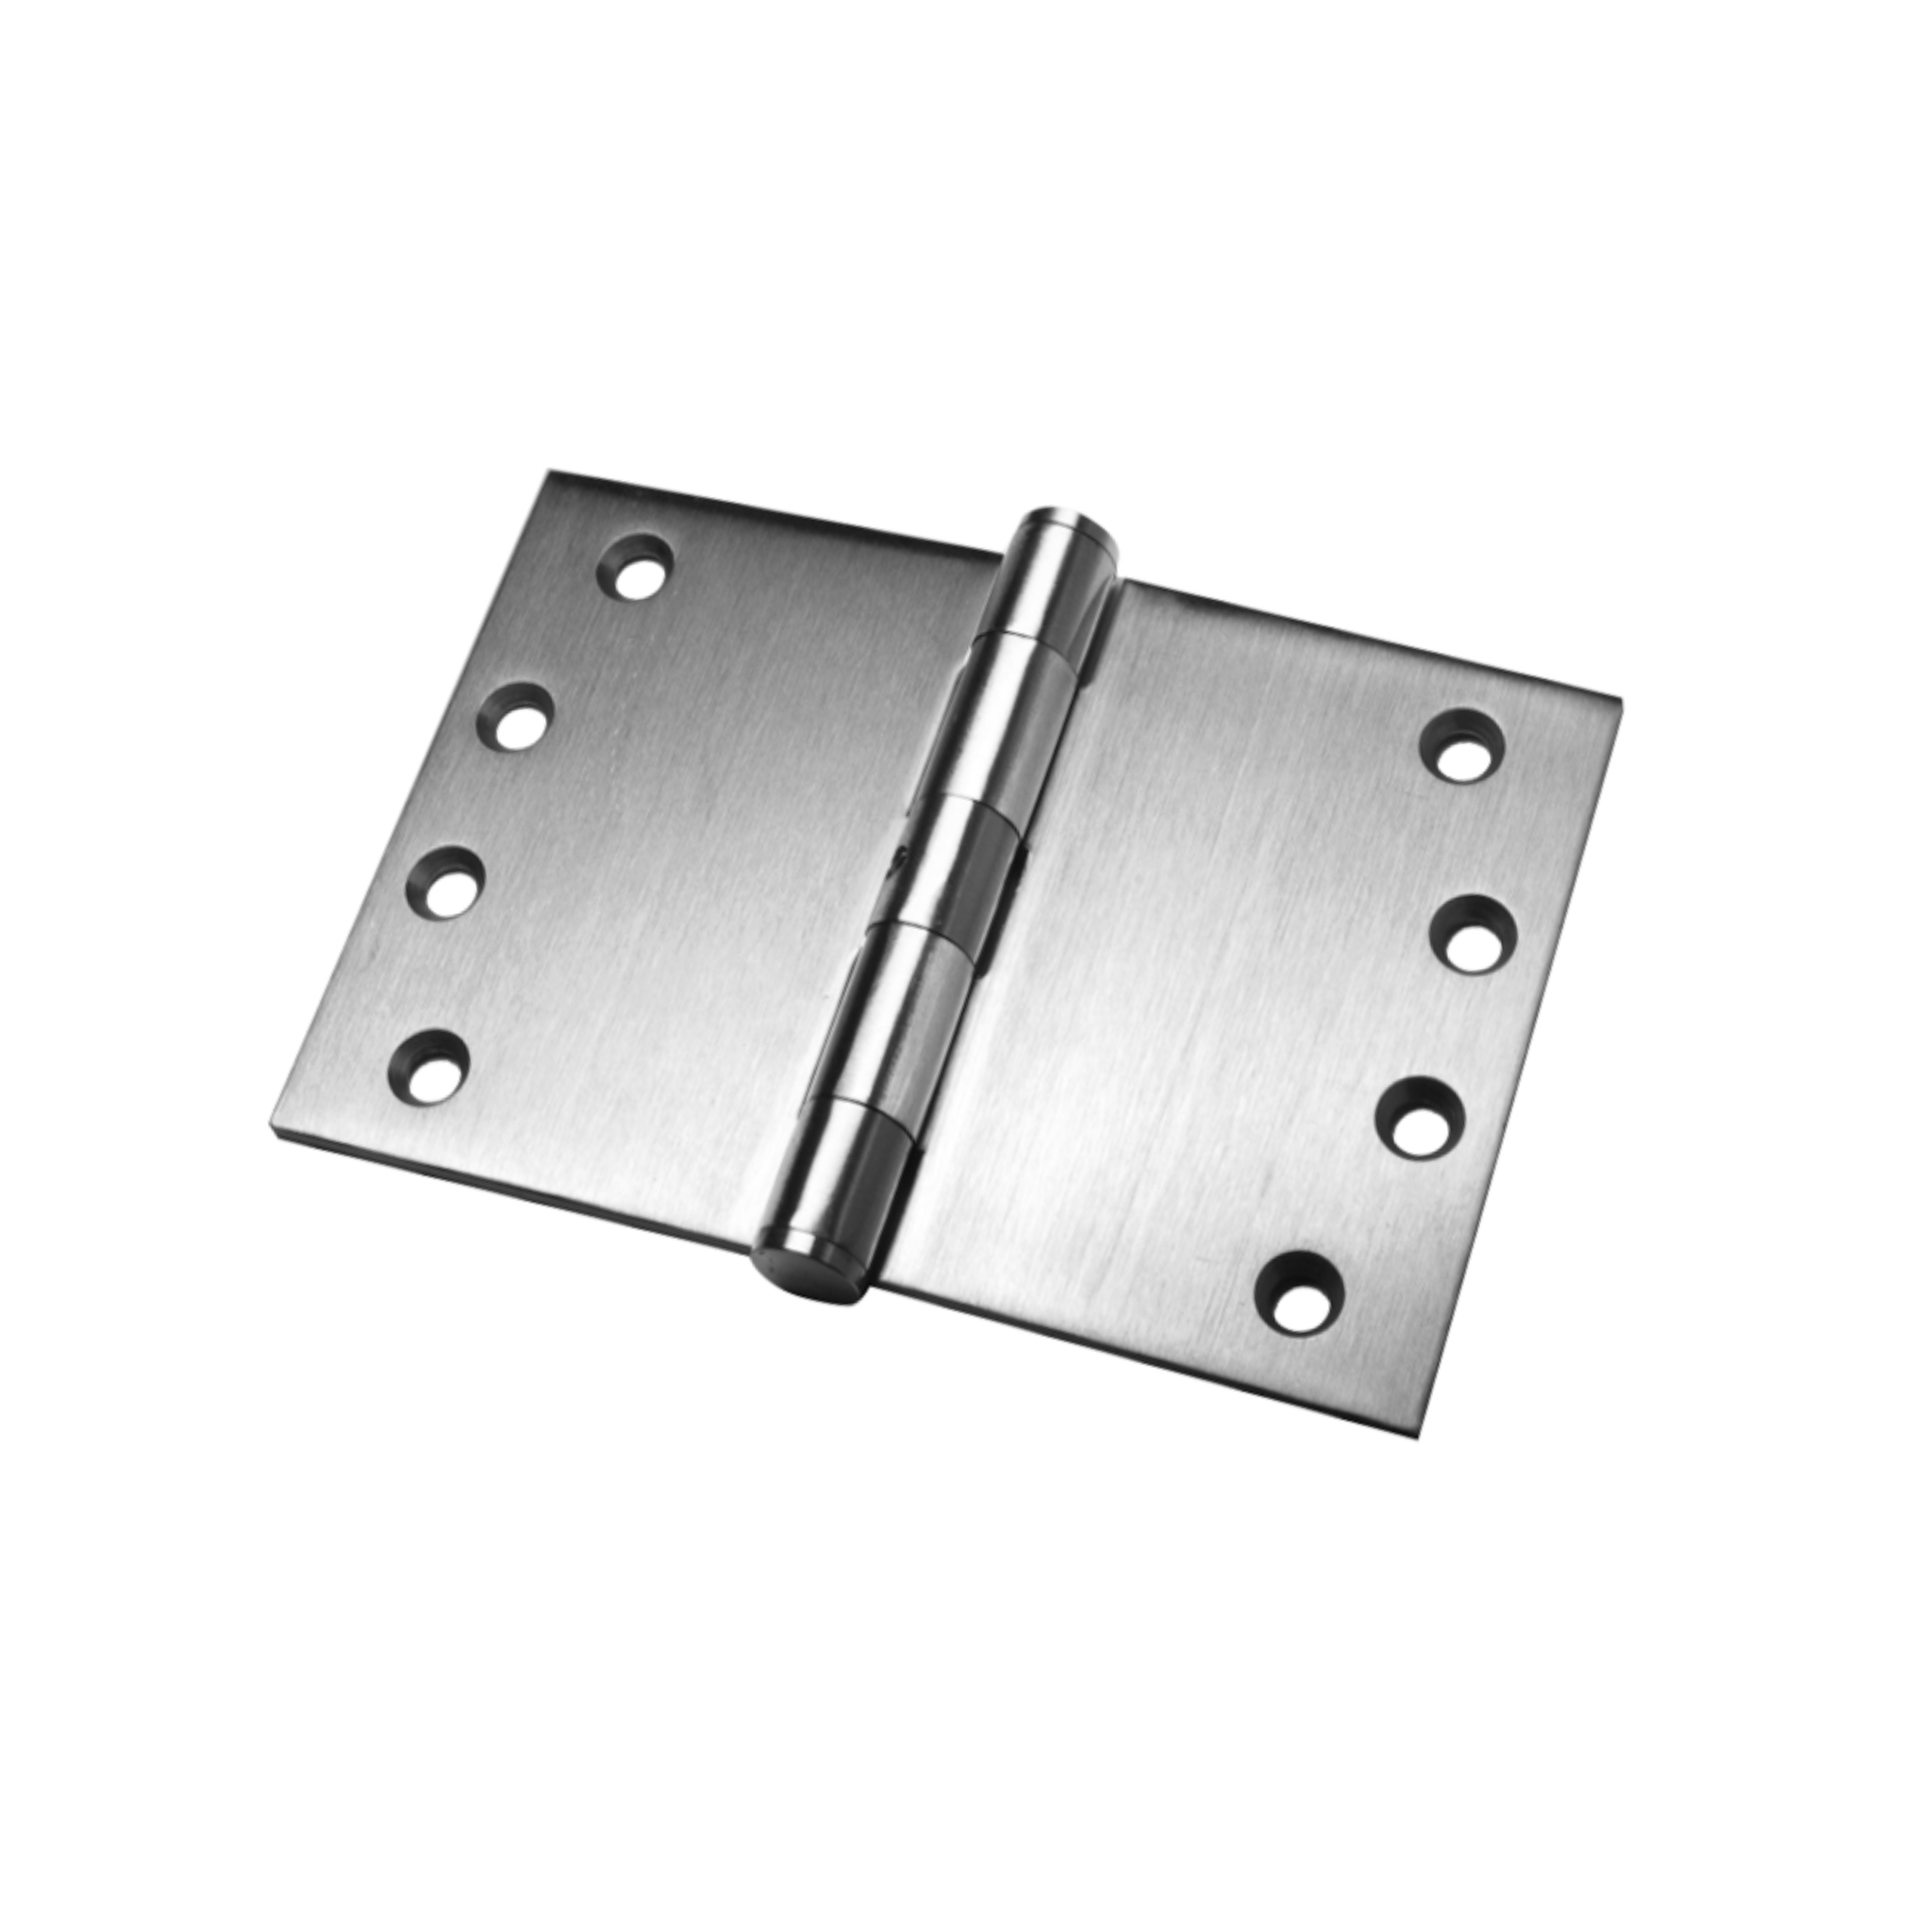 QS4412/2 180, Projection Hinge, 2 x Hinges (1 Pair), 100mm (h) x 180mm (w) x 3.5mm (t), Stainless Steel, QS